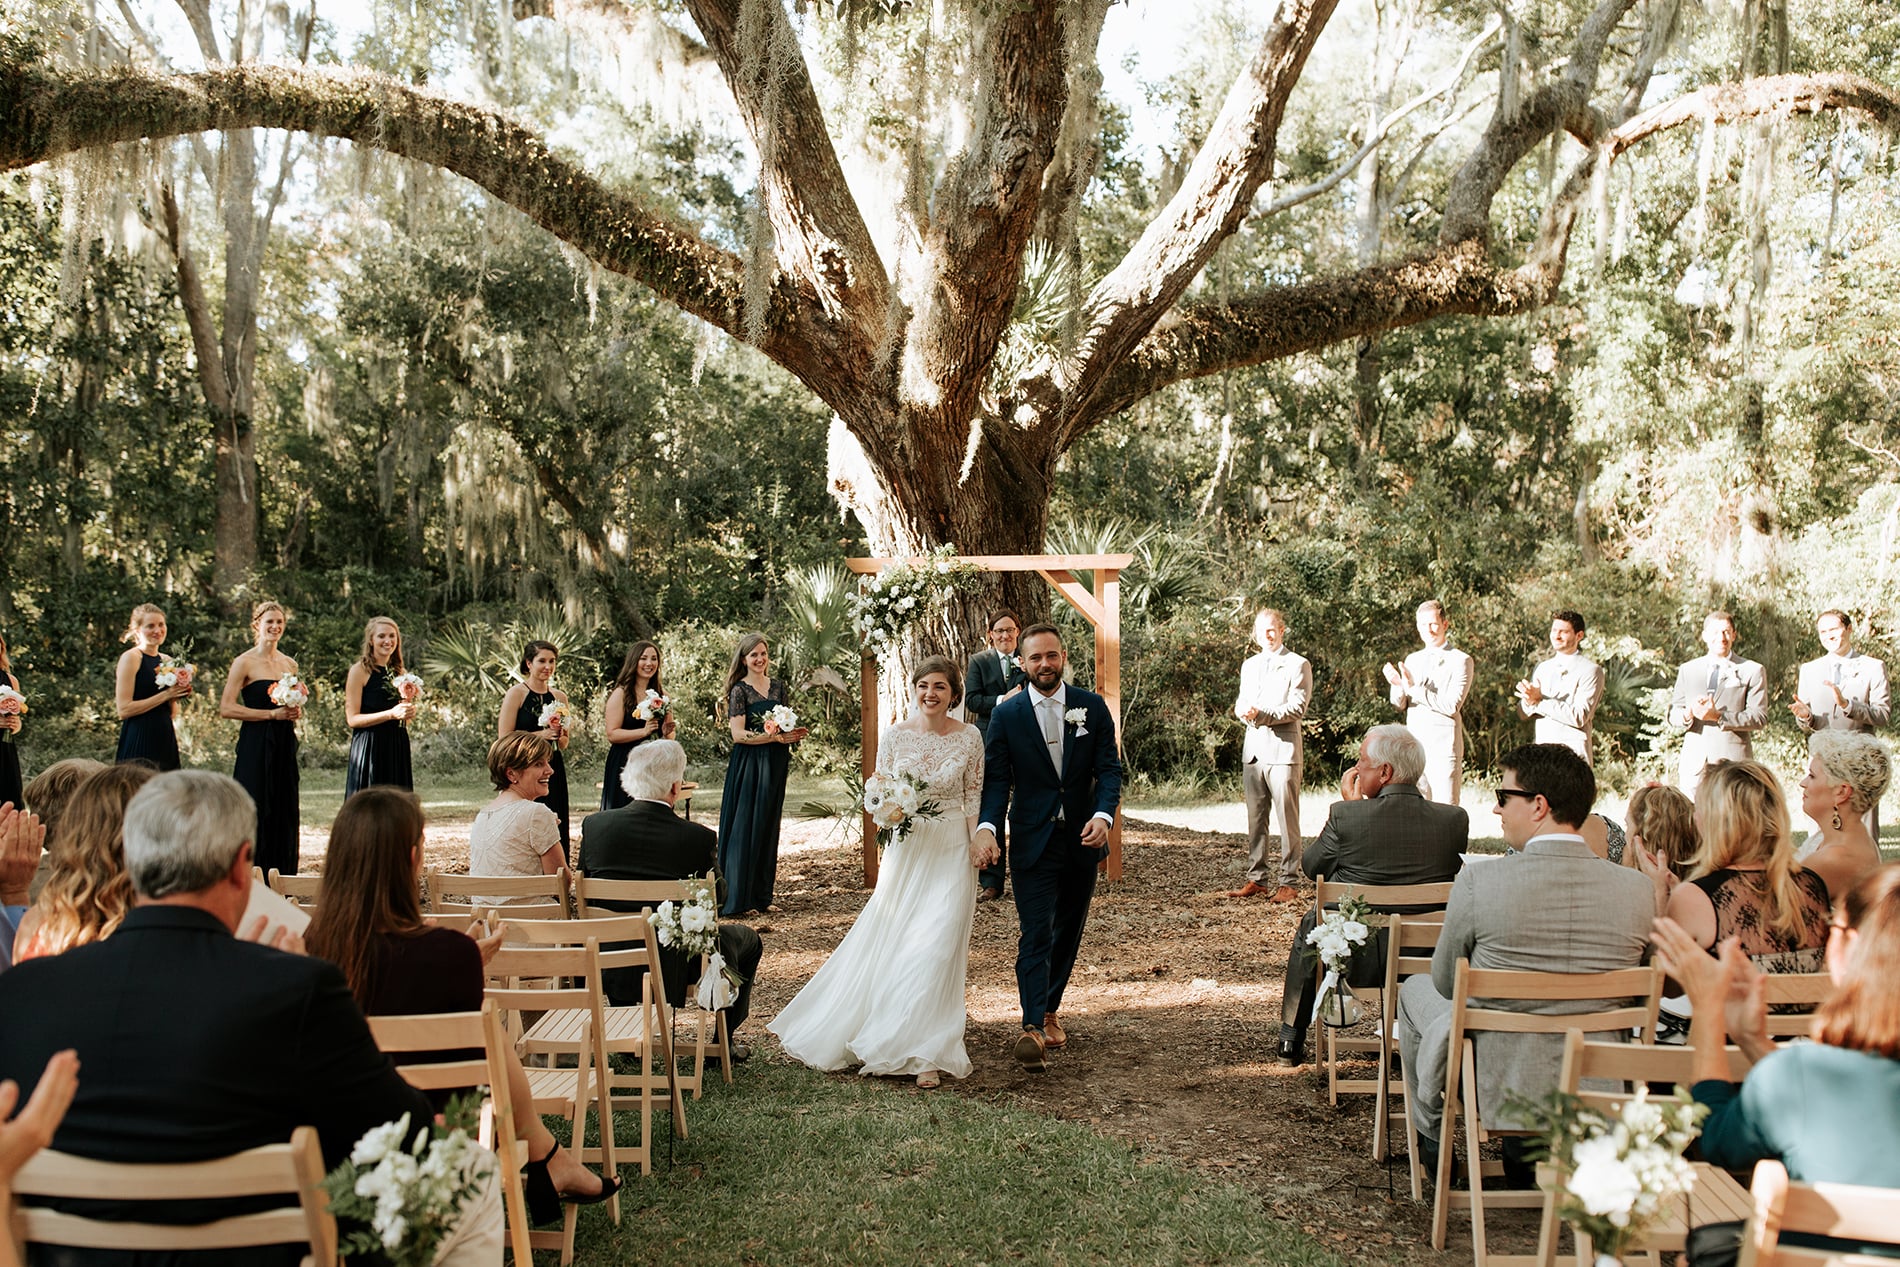 lowcountry-kitchen-catering-beaufort-sc-mary-grace-and-judd-kennedy-wedding-ceremony-outdoors-min.jpg